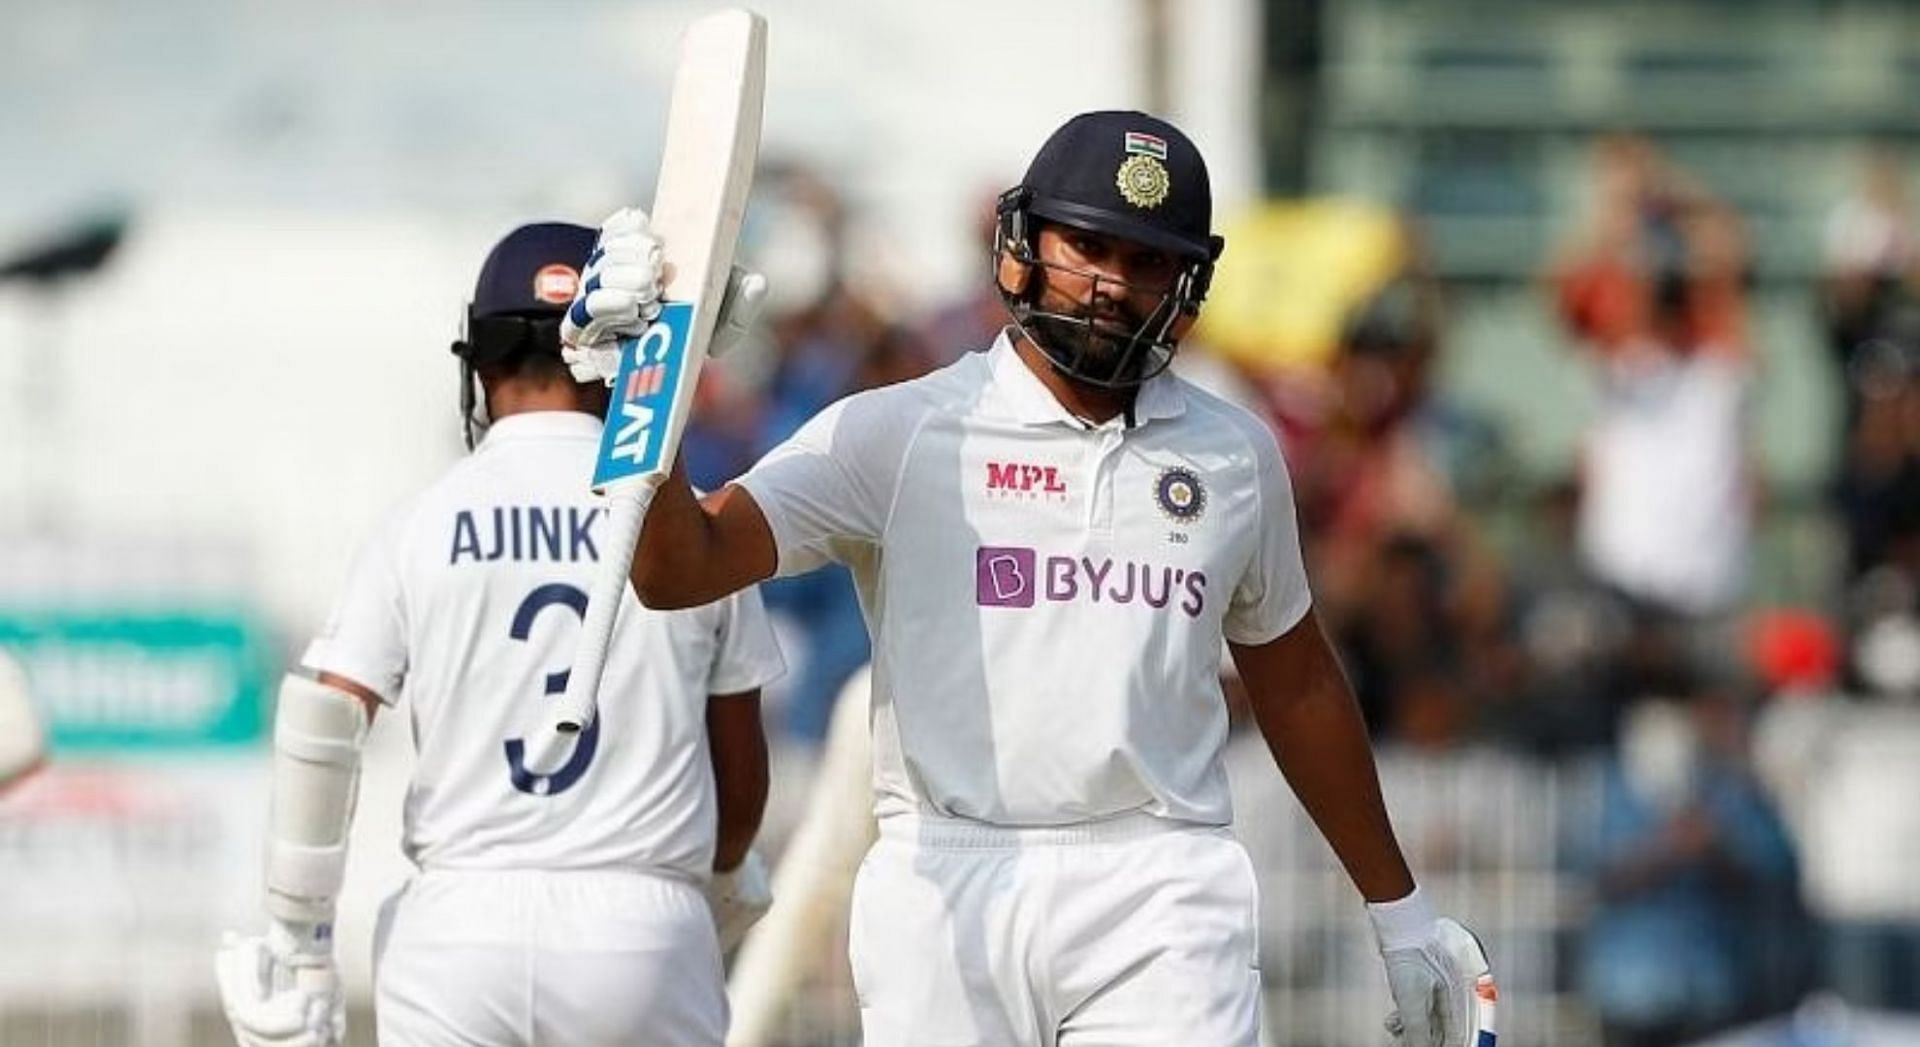 Once you've scored runs in England conditions, your confidence will be very high” – Saba Karim on Rohit Sharma